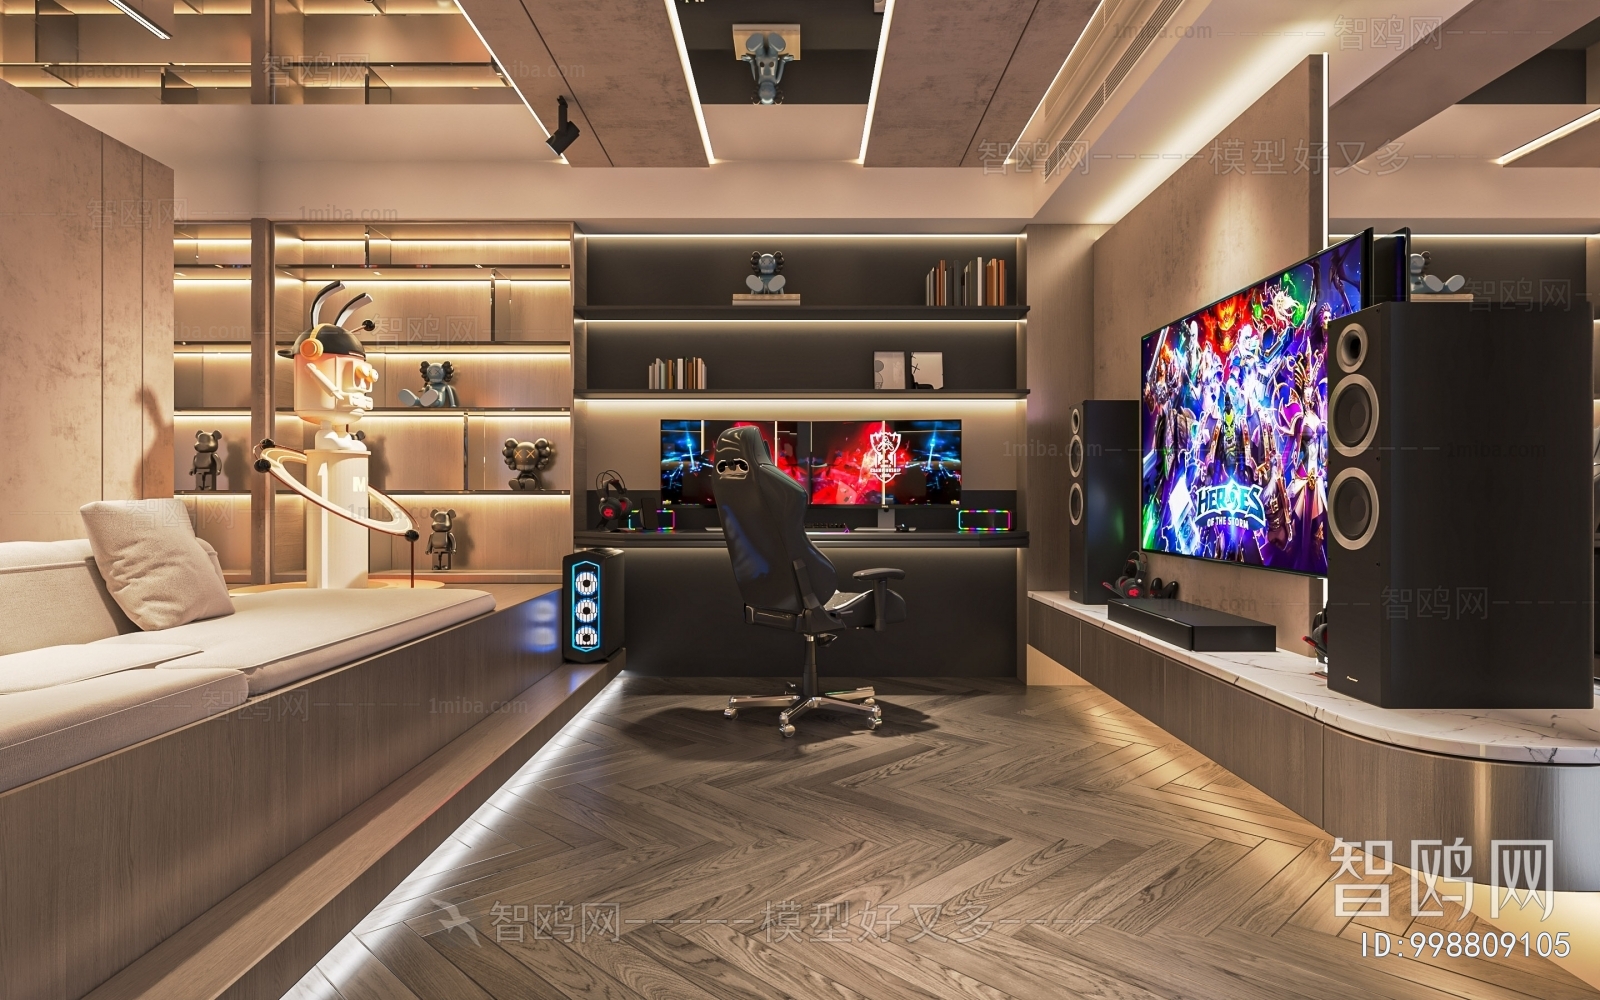 Modern Space For Entertainment